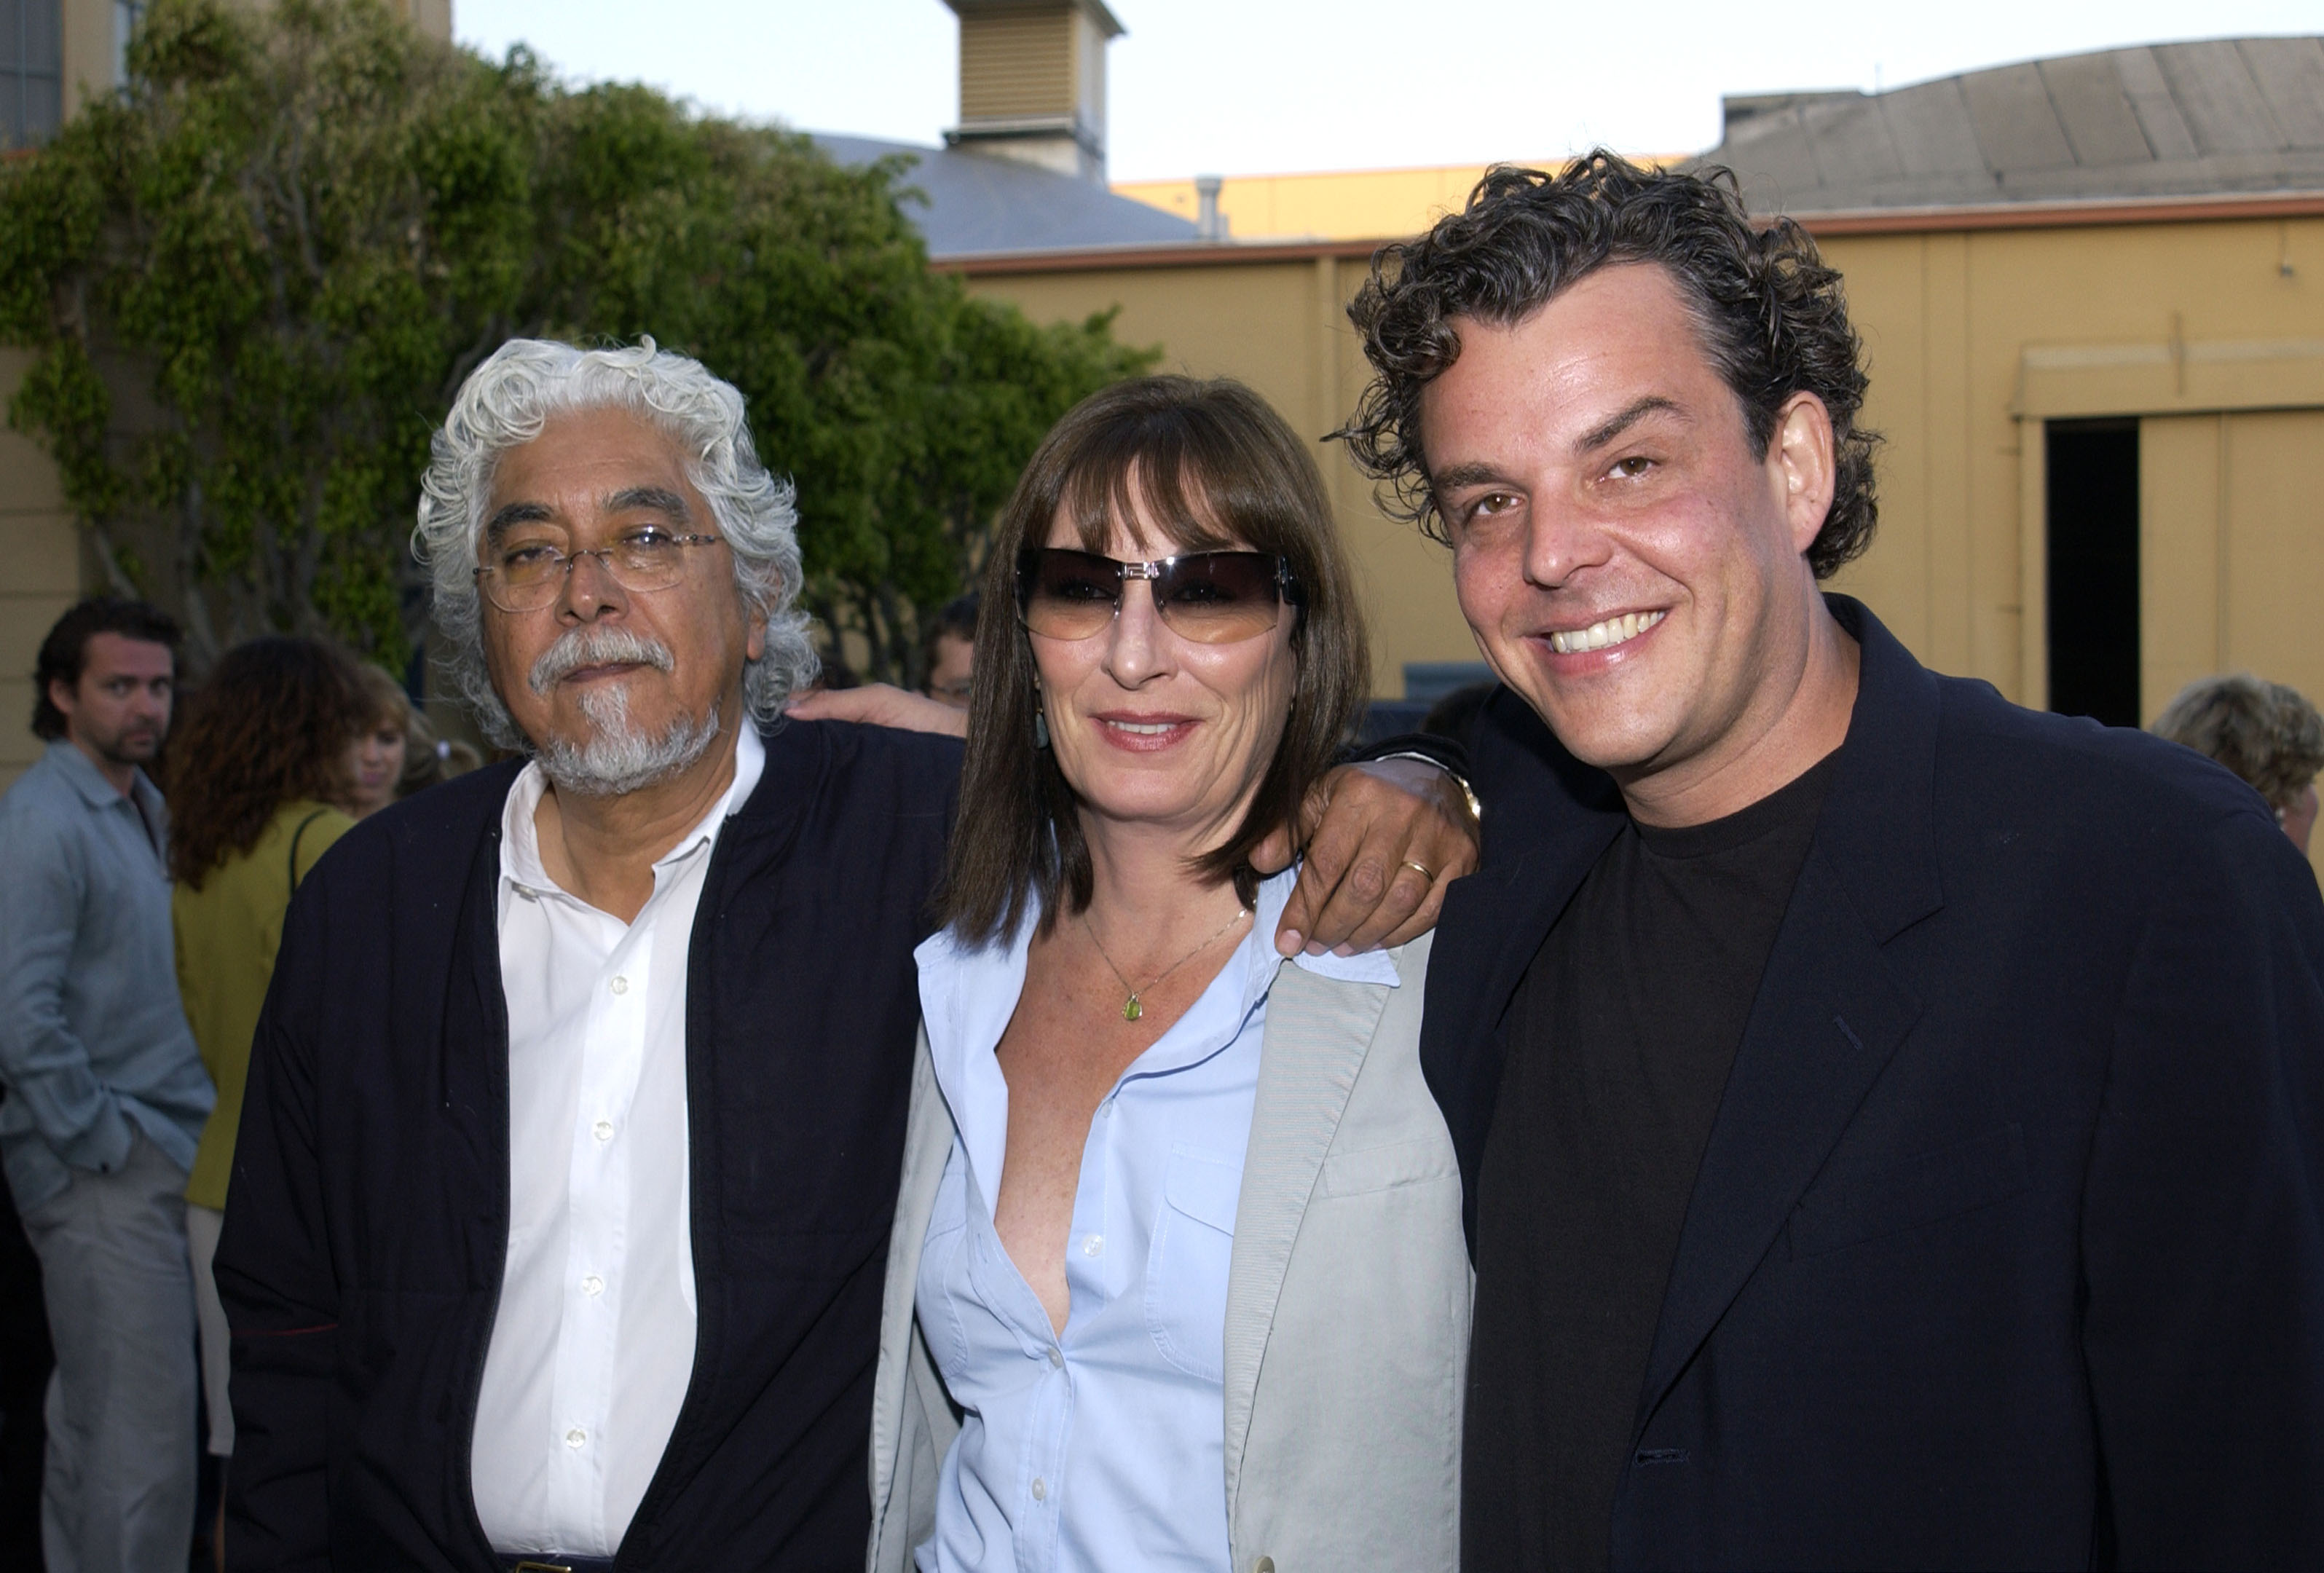 Robert Graham, Anjelica Huston & Danny Huston are seen during the "Ivansxtc" Los Angeles Premiere at Raleigh Studios in Los Angeles, California, United States.  |  Source: Getty Images